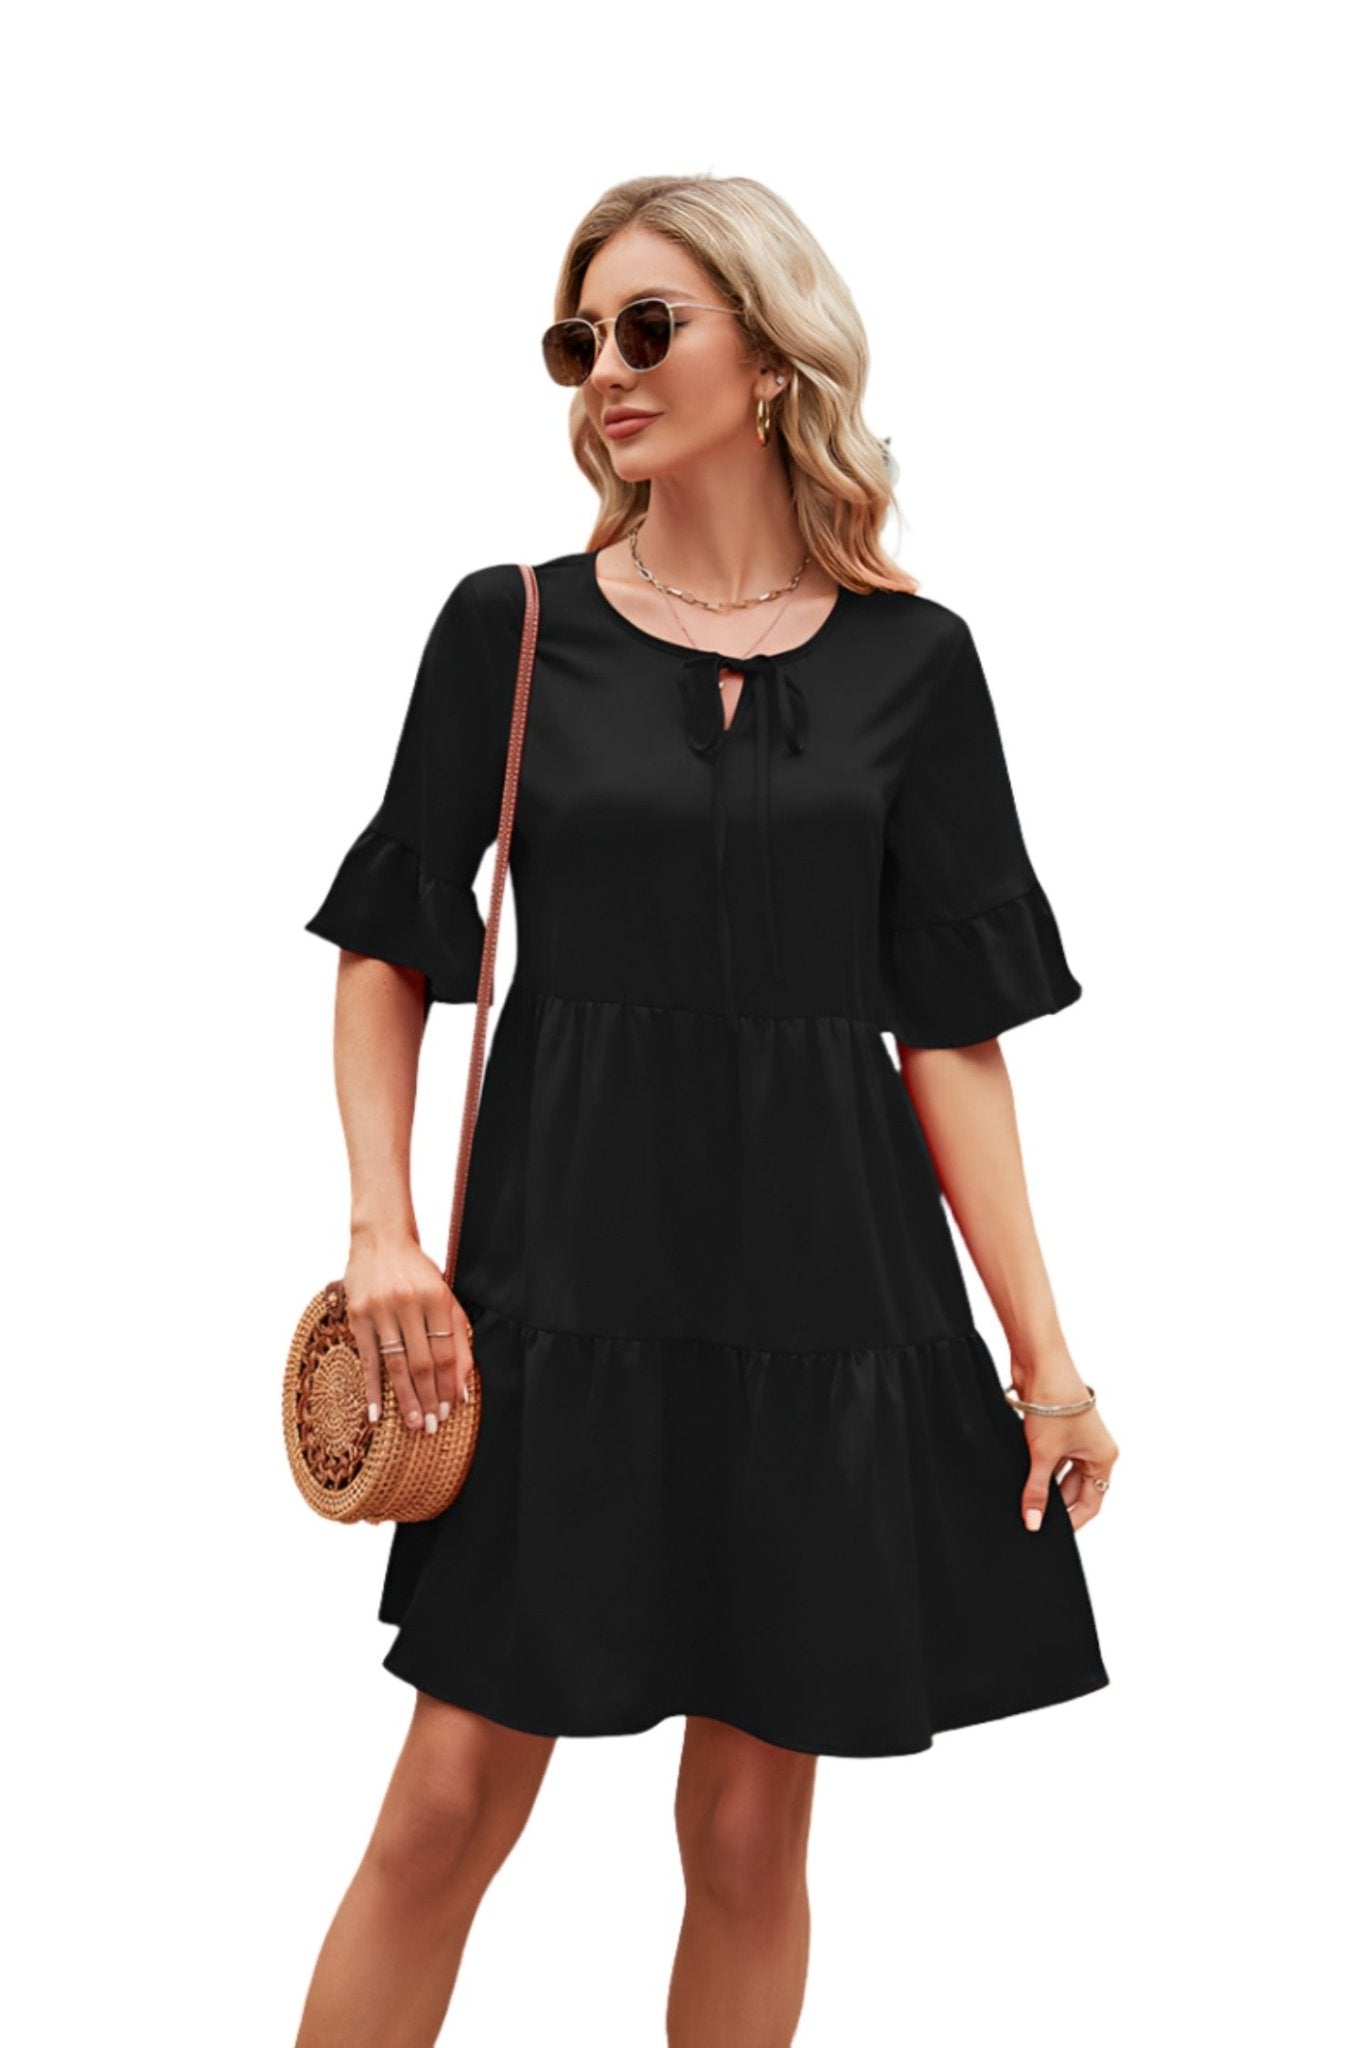 The image is showcasing a Ruffle Trim Tie Neck Flounce Sleeve Tiered Mini Dress Women Casual Half Sleeve Knee length Dress at Mommy & Lino's Closet